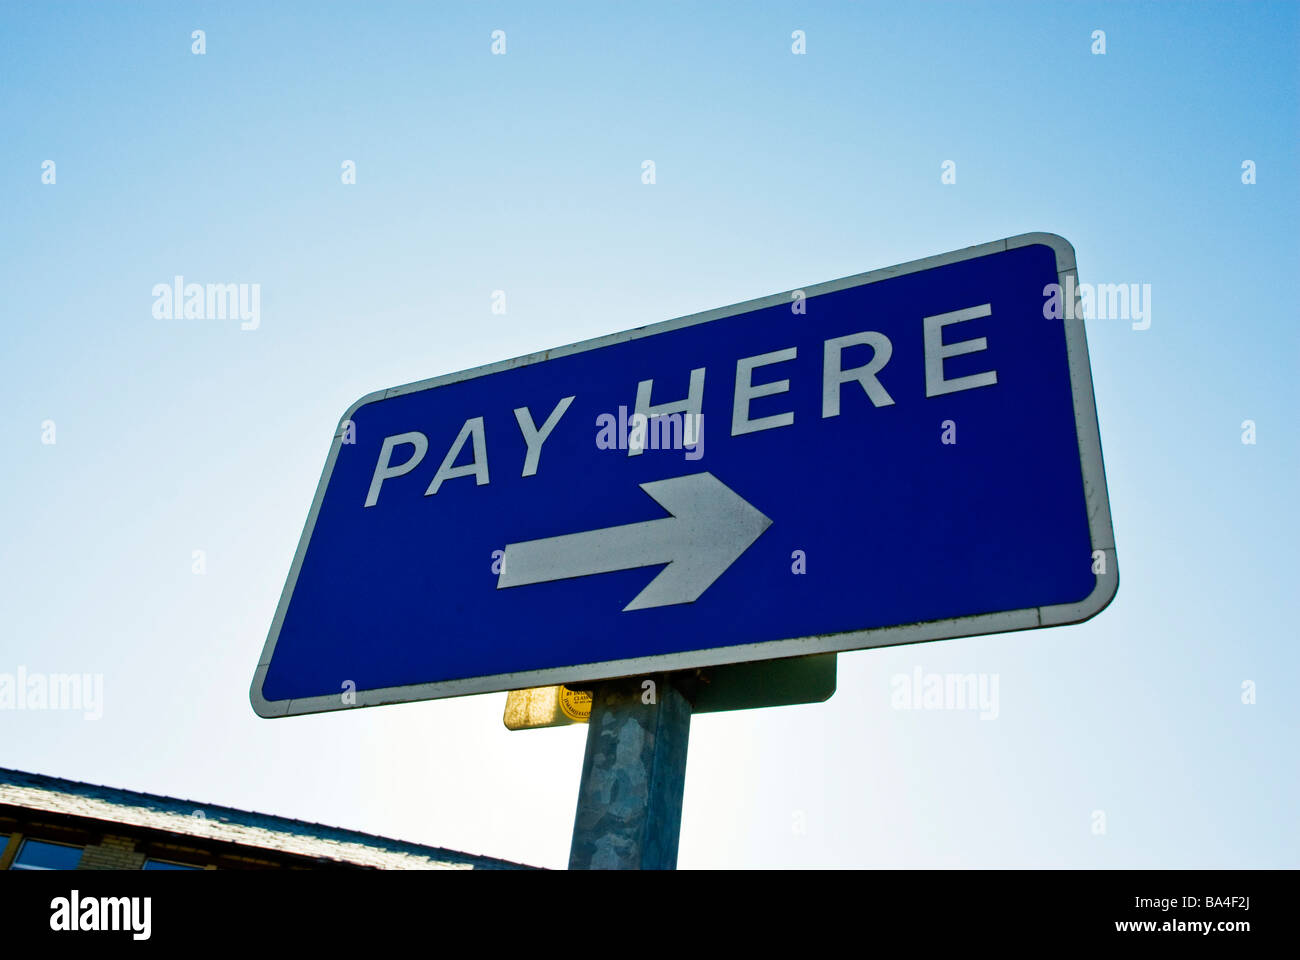 Pay Here sign against a clear blue sky Stock Photo